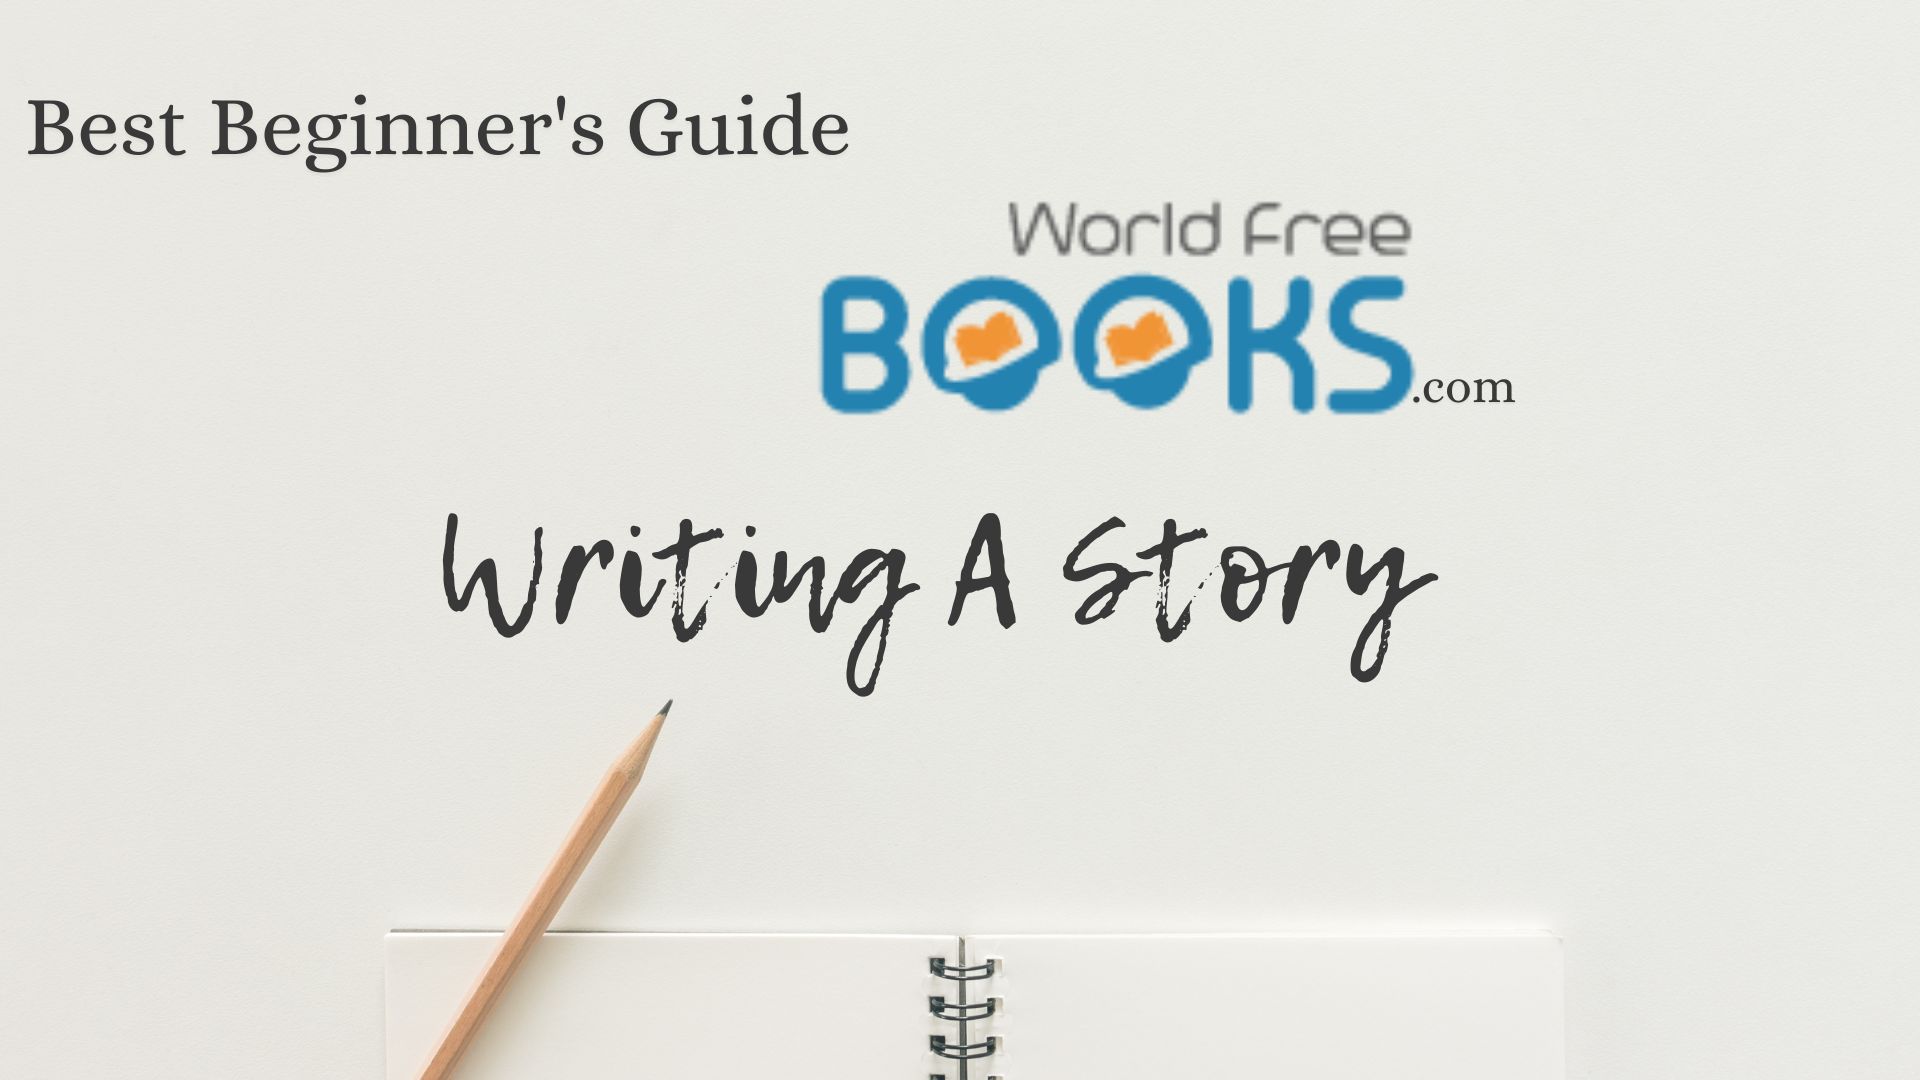 How To Start Writing A Story